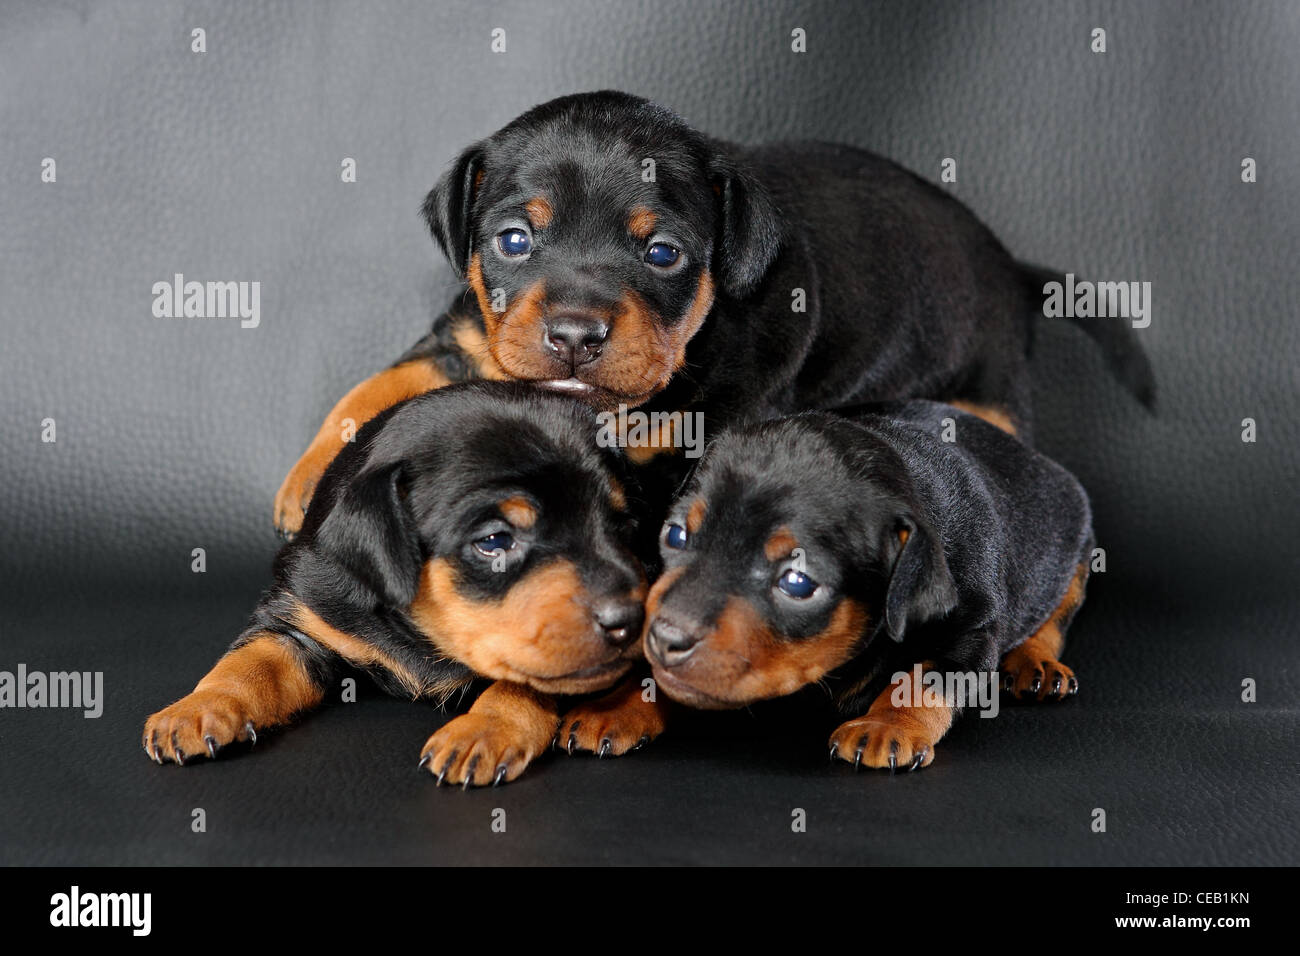 The Miniature Pinscher puppy, 3 weeks old, lying in front of black background Stock Photo